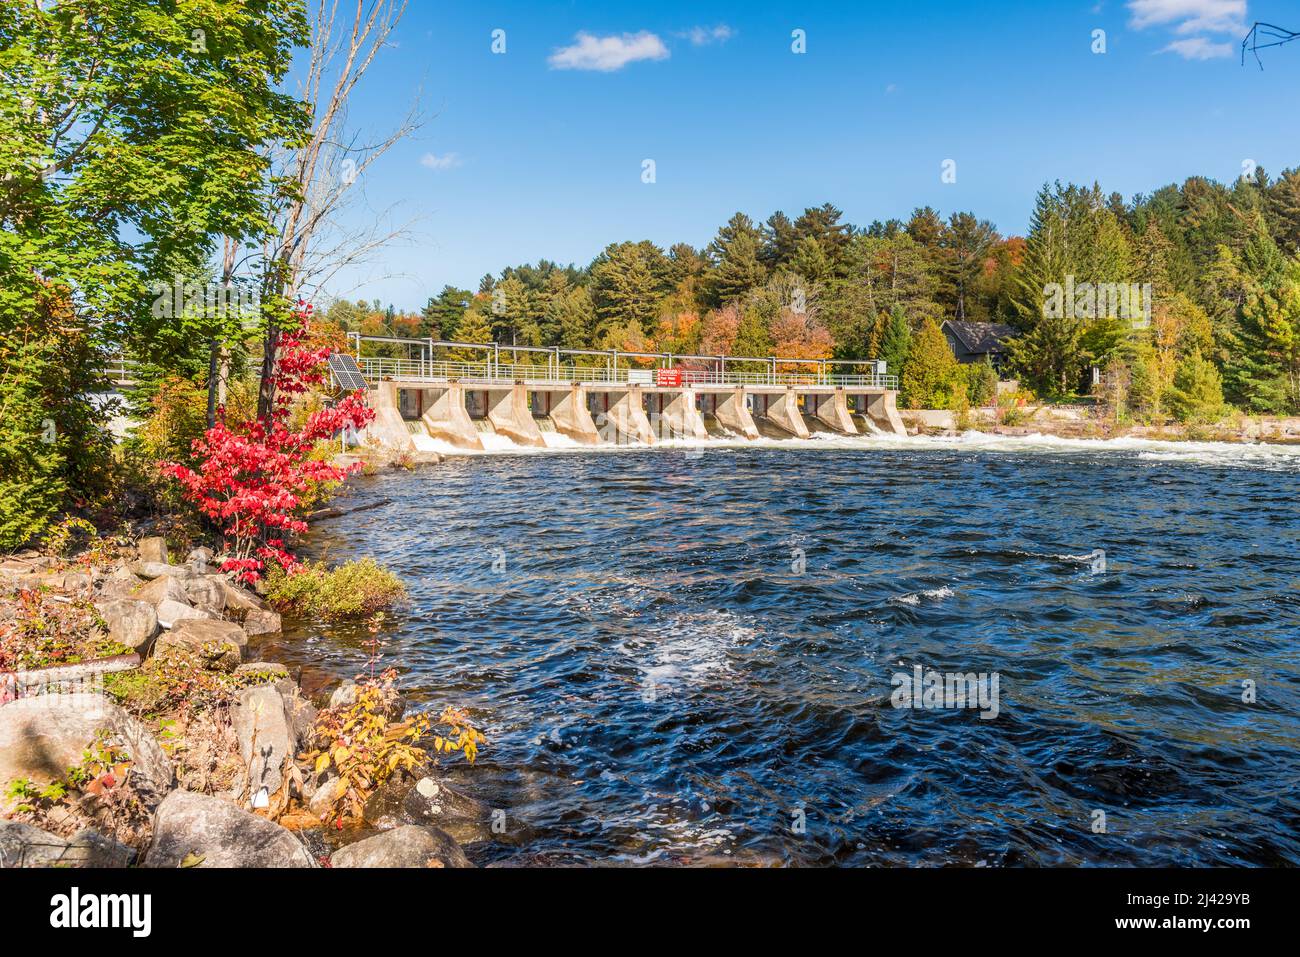 View of a small dam on a river with forested banks on a sunny autumn day Stock Photo